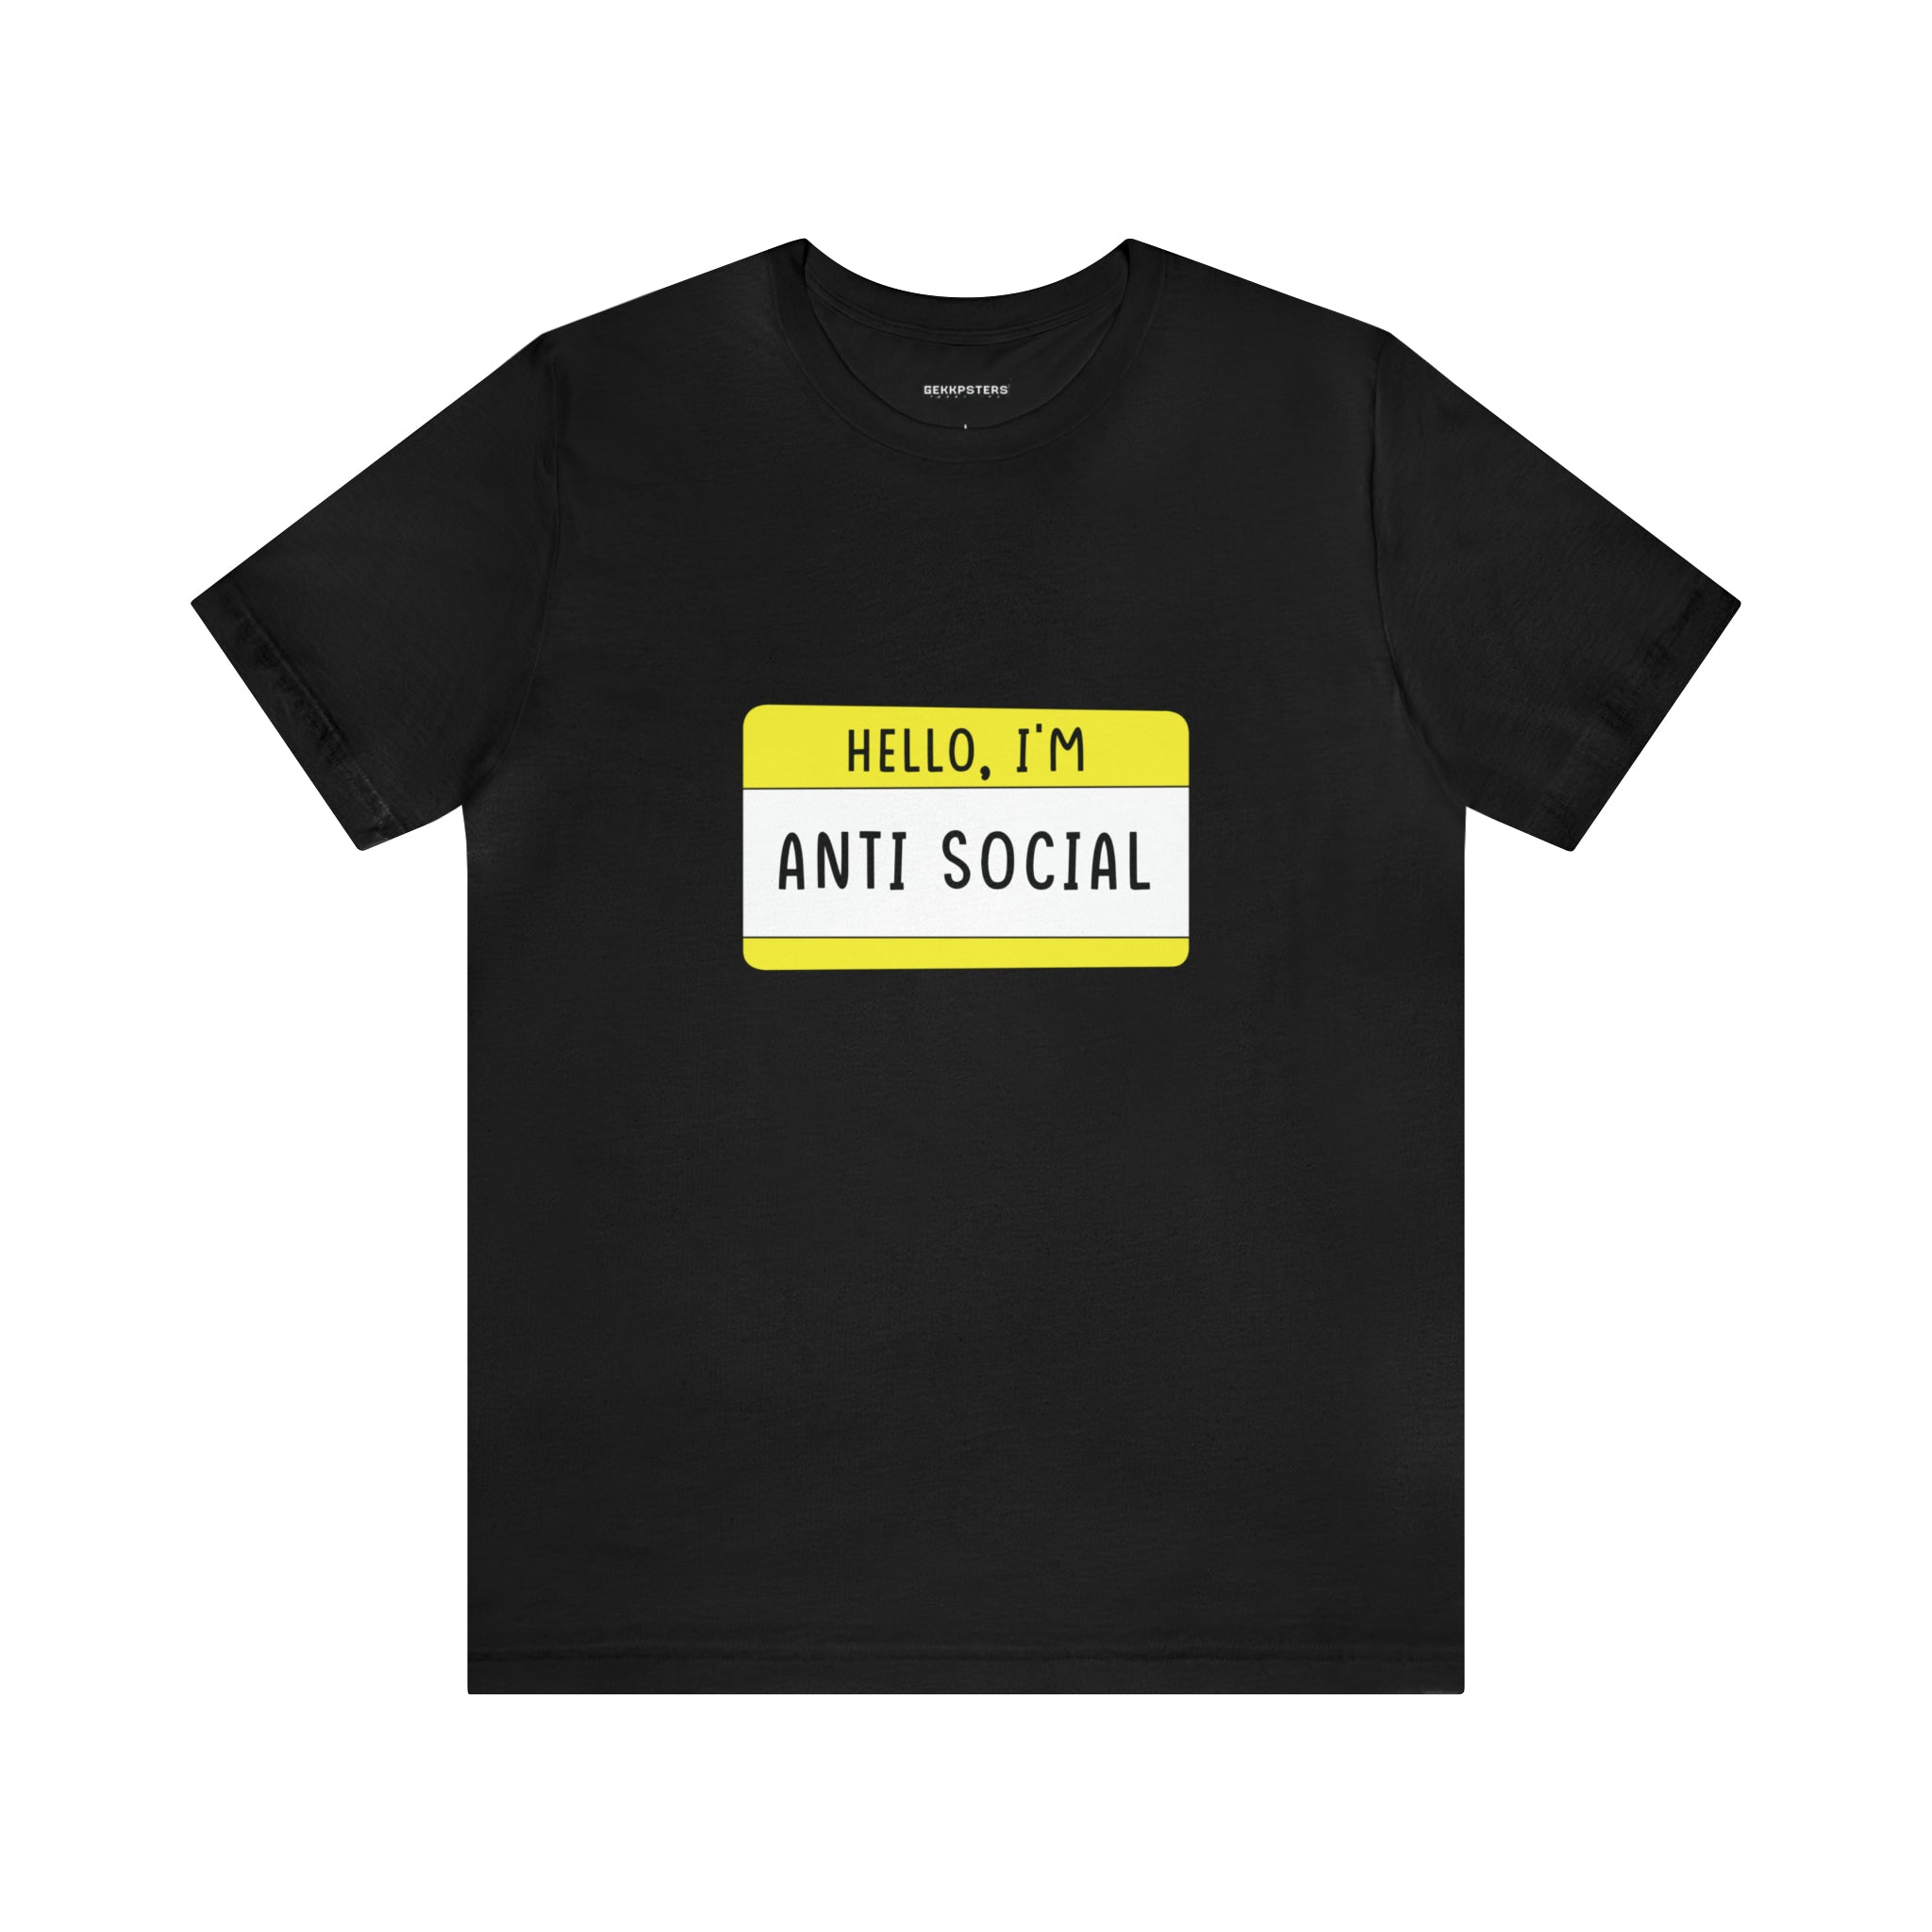 Black Hello, I'm Anti Social T-Shirt with a yellow name tag graphic on the chest that reads "hello, i'm anti-social" in black text.